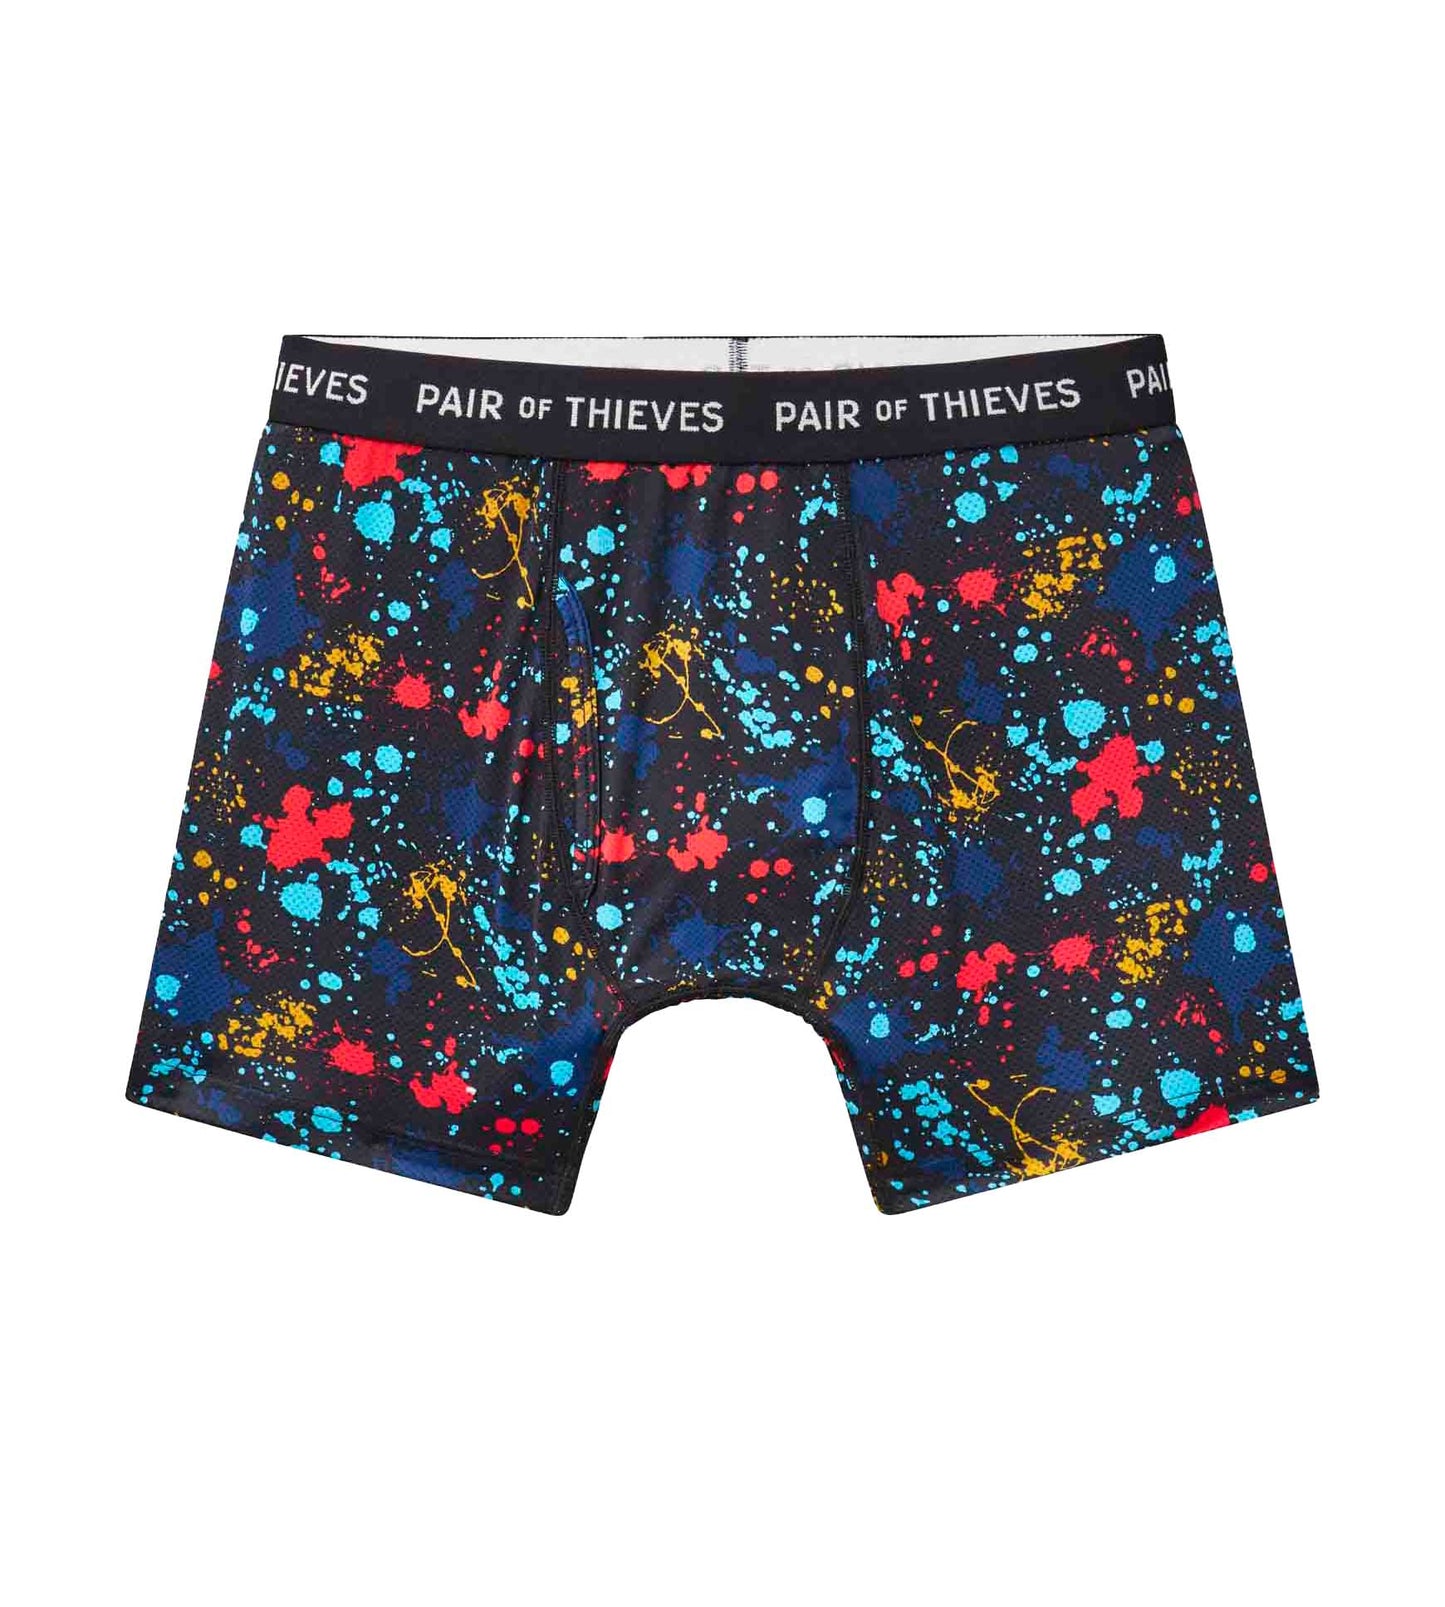 SuperFit Boxer Briefs 2 Pack Floral Glitch - Pair of Thieves